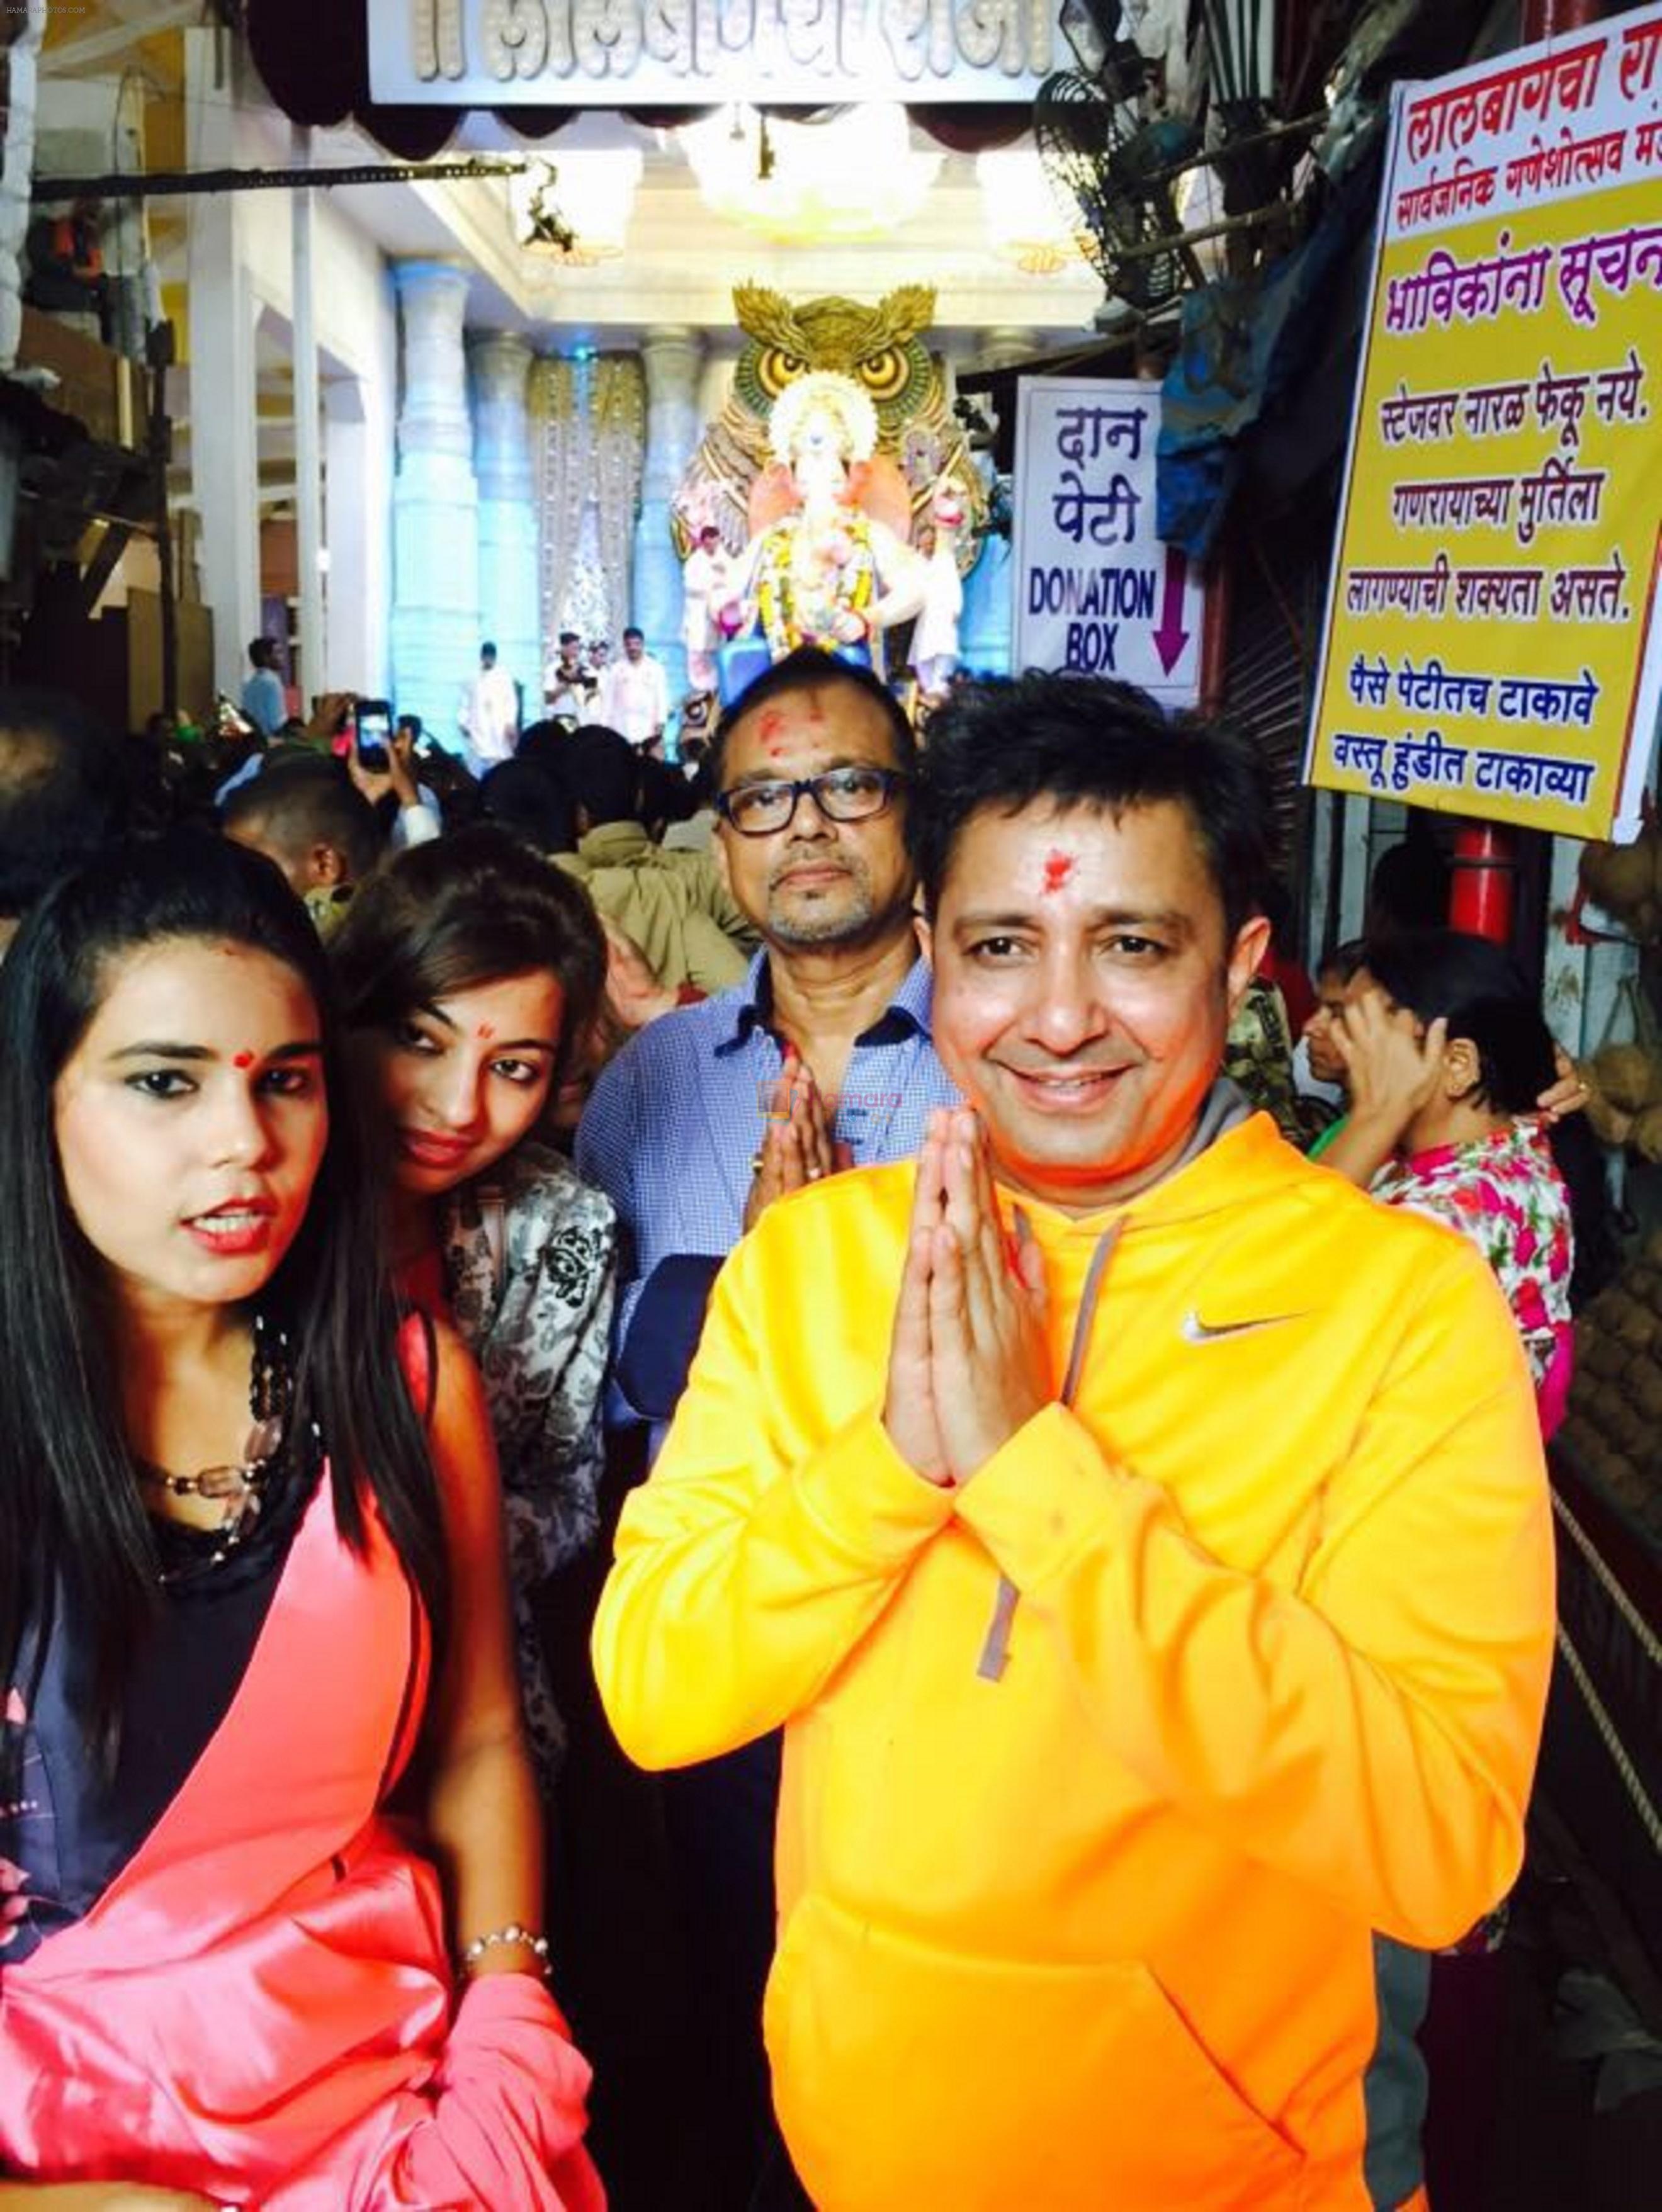 Sukhwinder Singh during his visit to Lalbaug cha raja on 8th Sept 2016